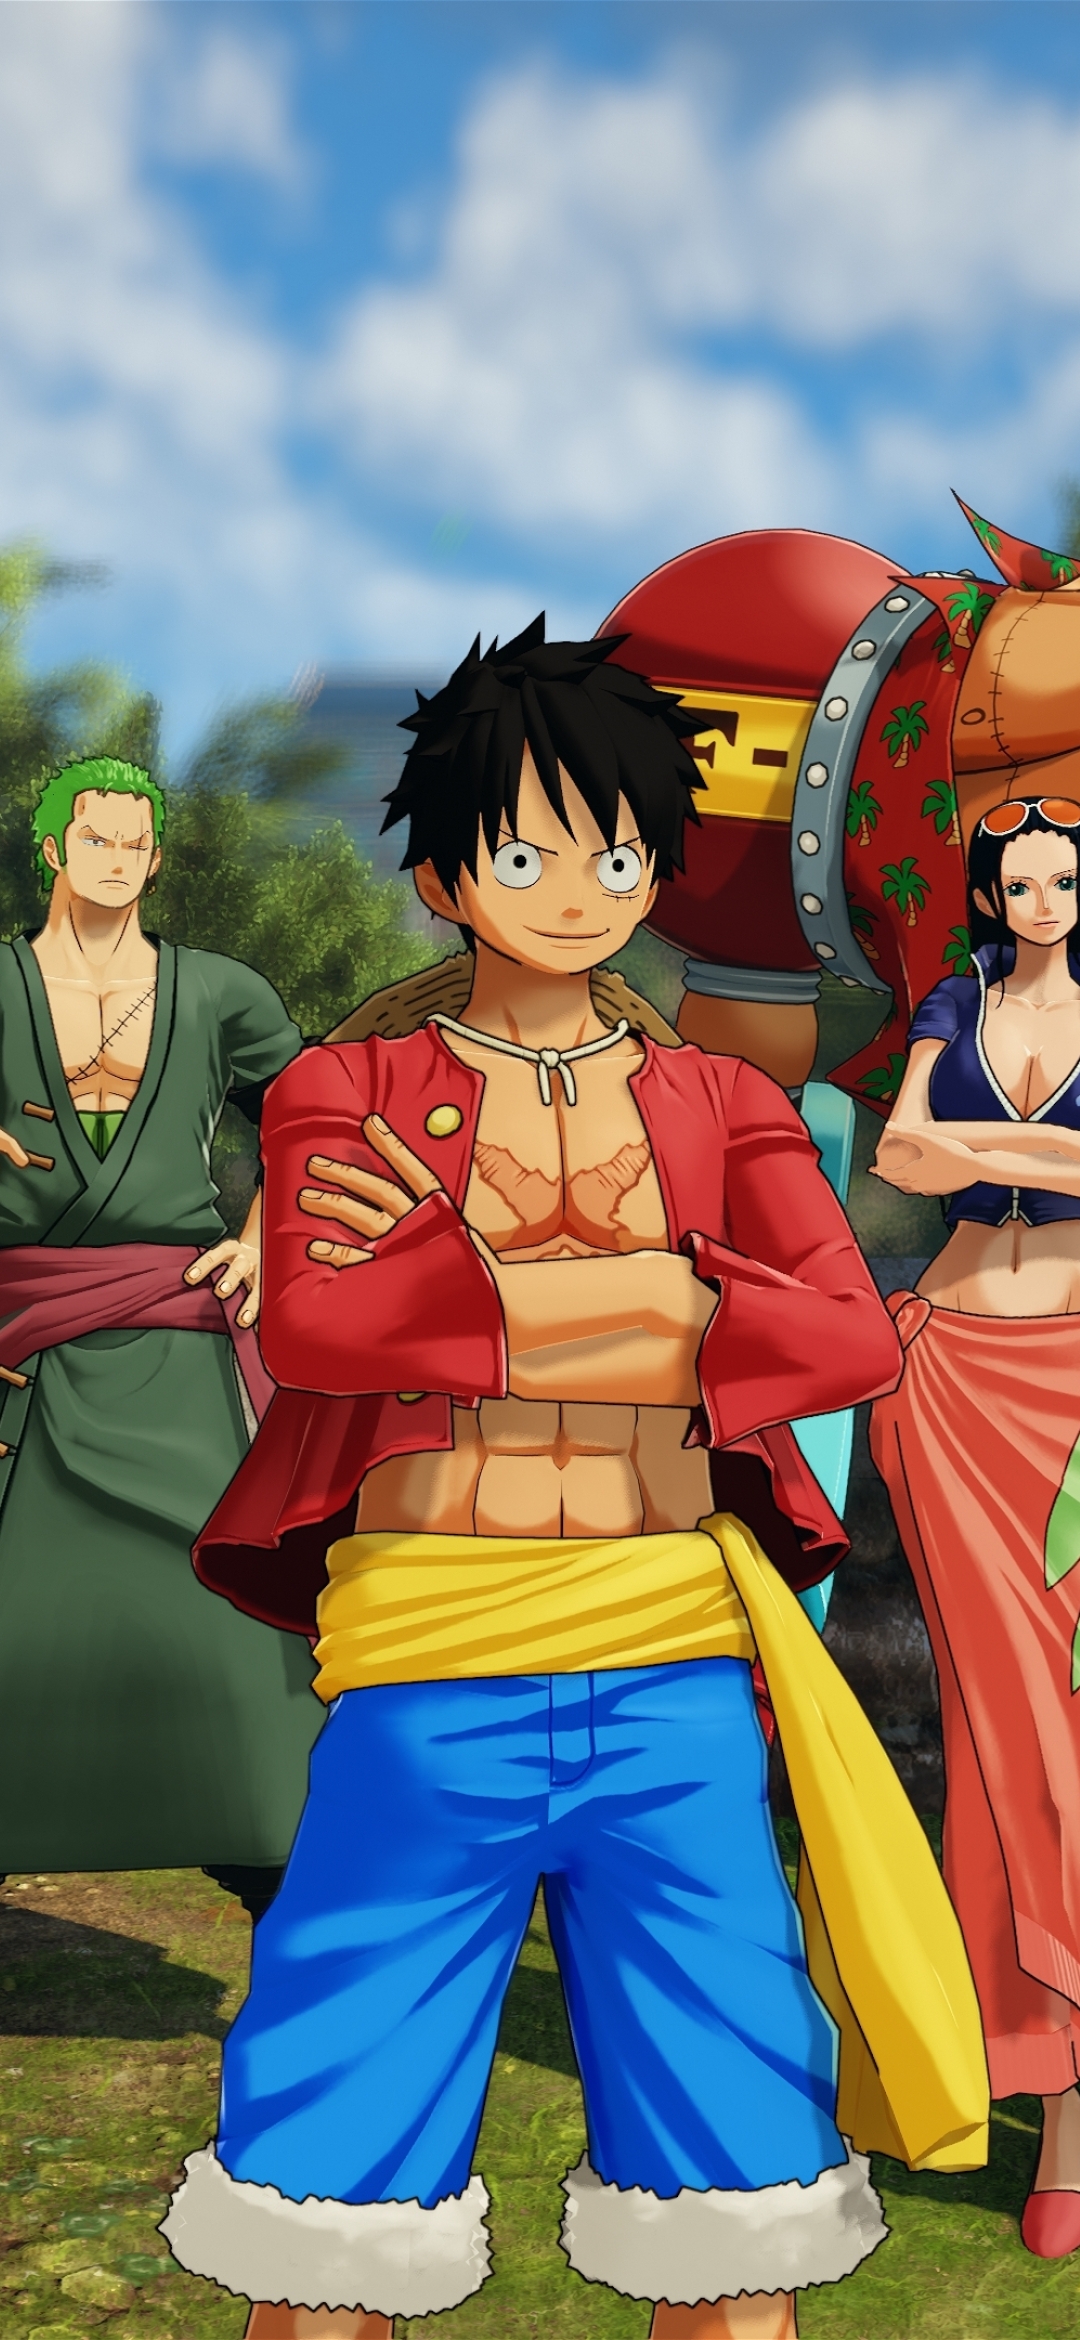 1080x2340 One Piece World Seeker 4k 1080x2340 Resolution Wallpaper Hd Games 4k Wallpapers Images Photos And Background